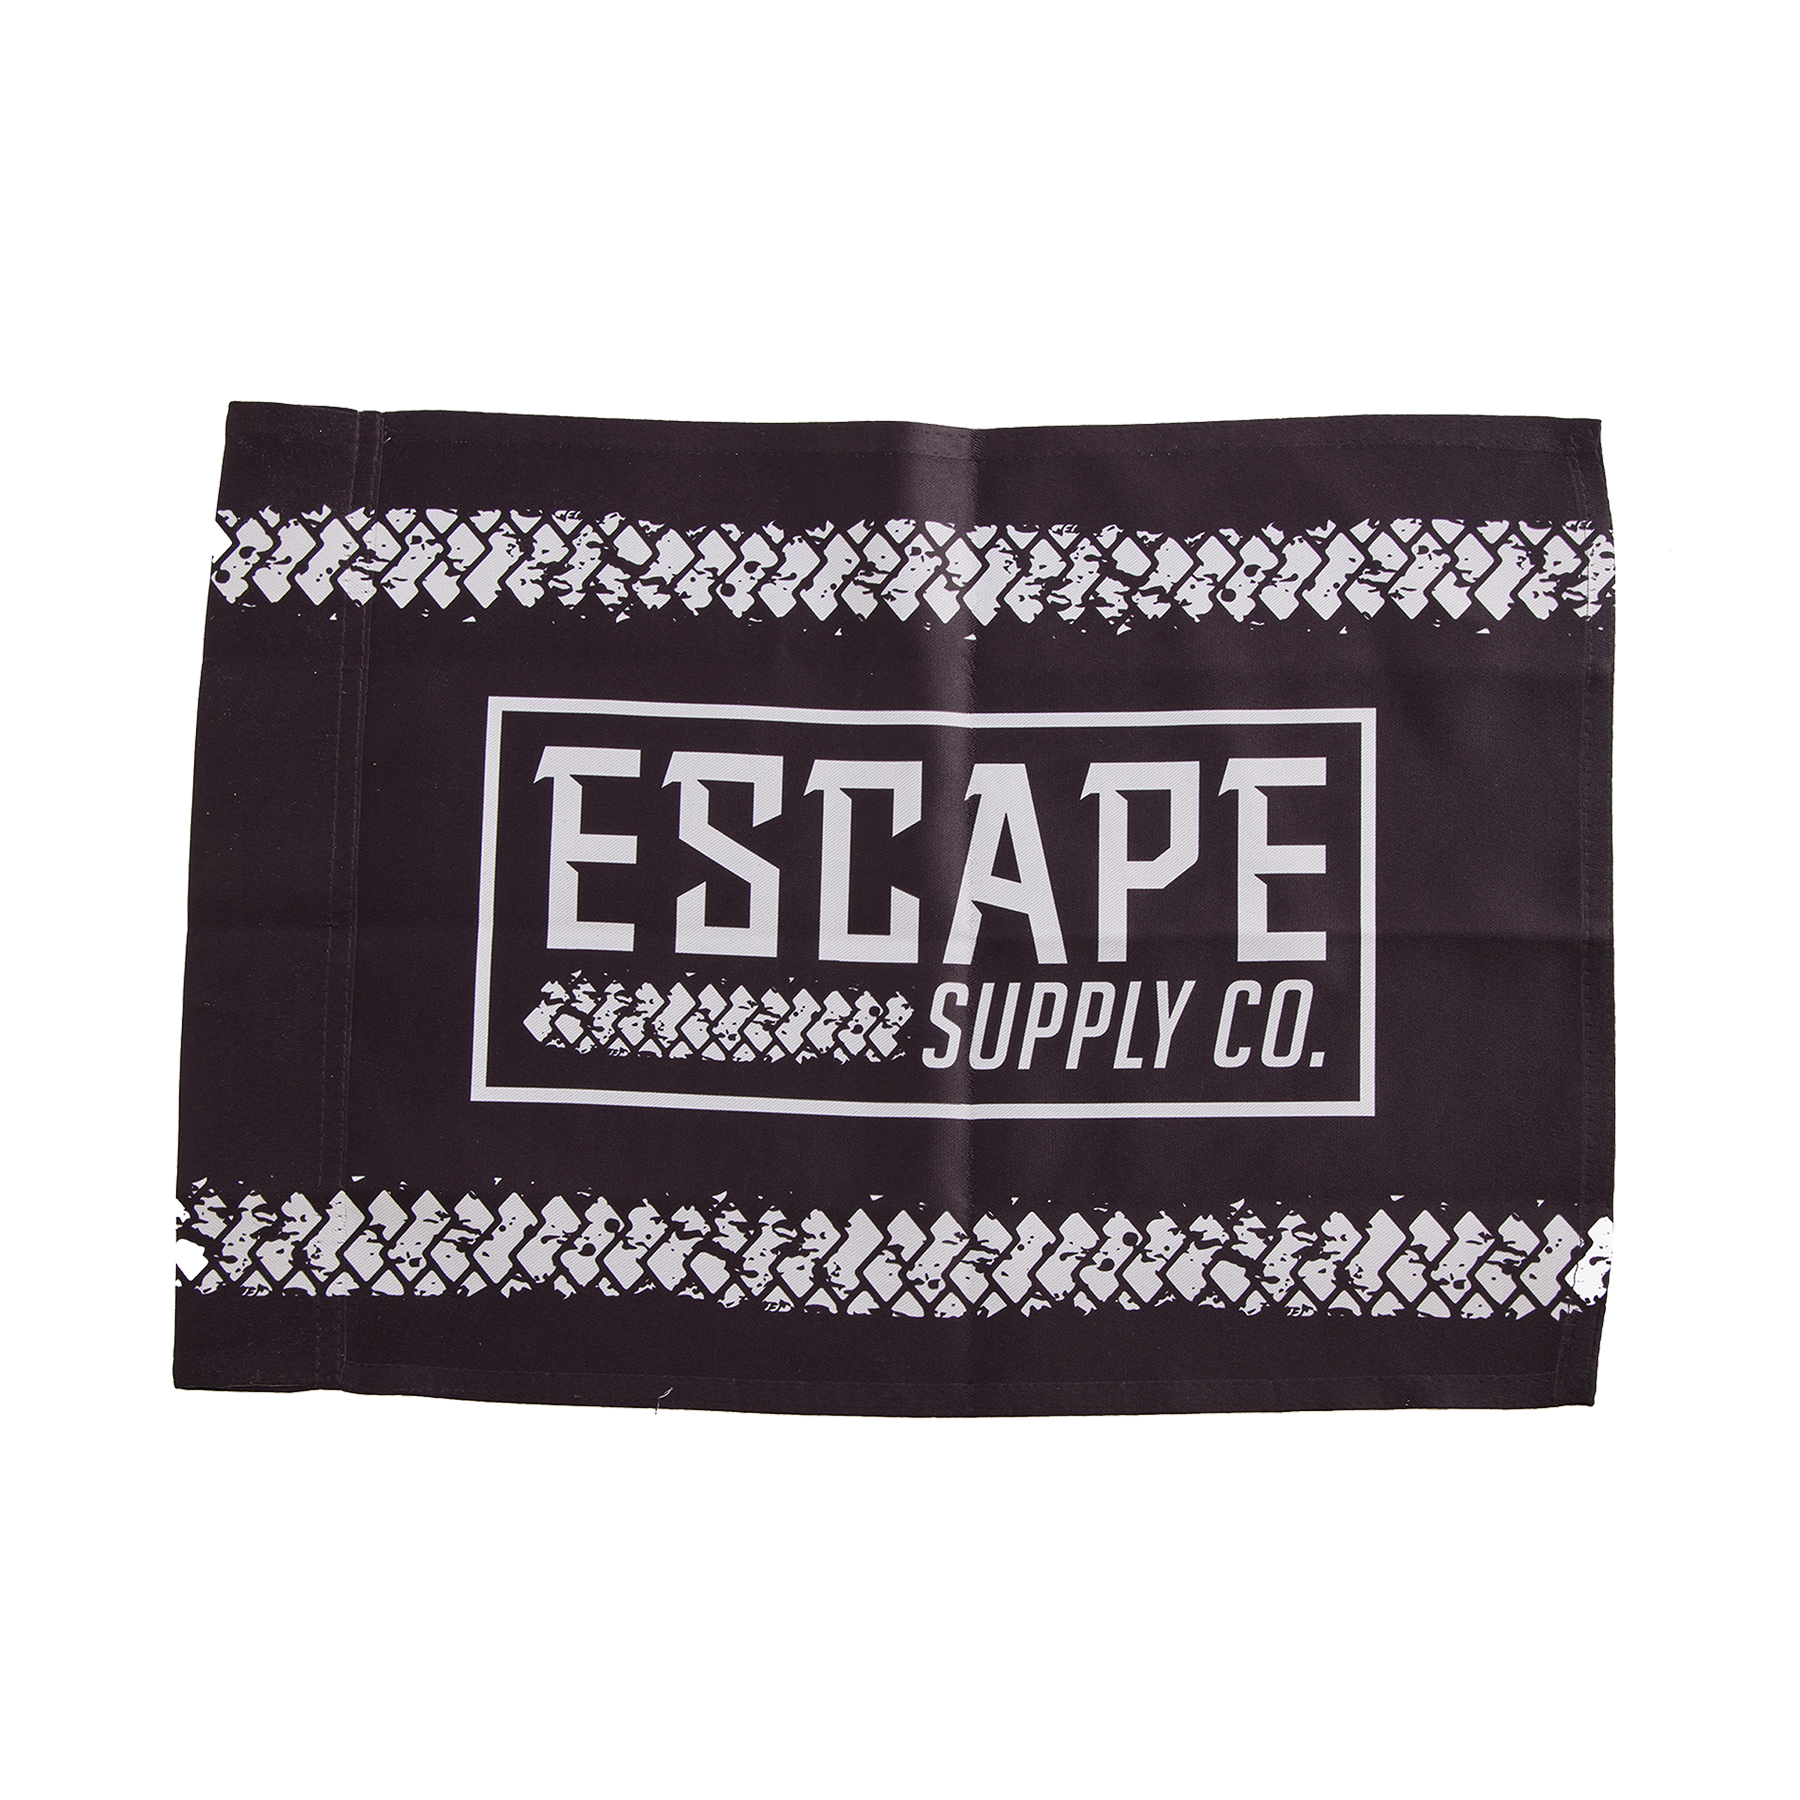 Escape Mud Trax Whip-it Warning Flag